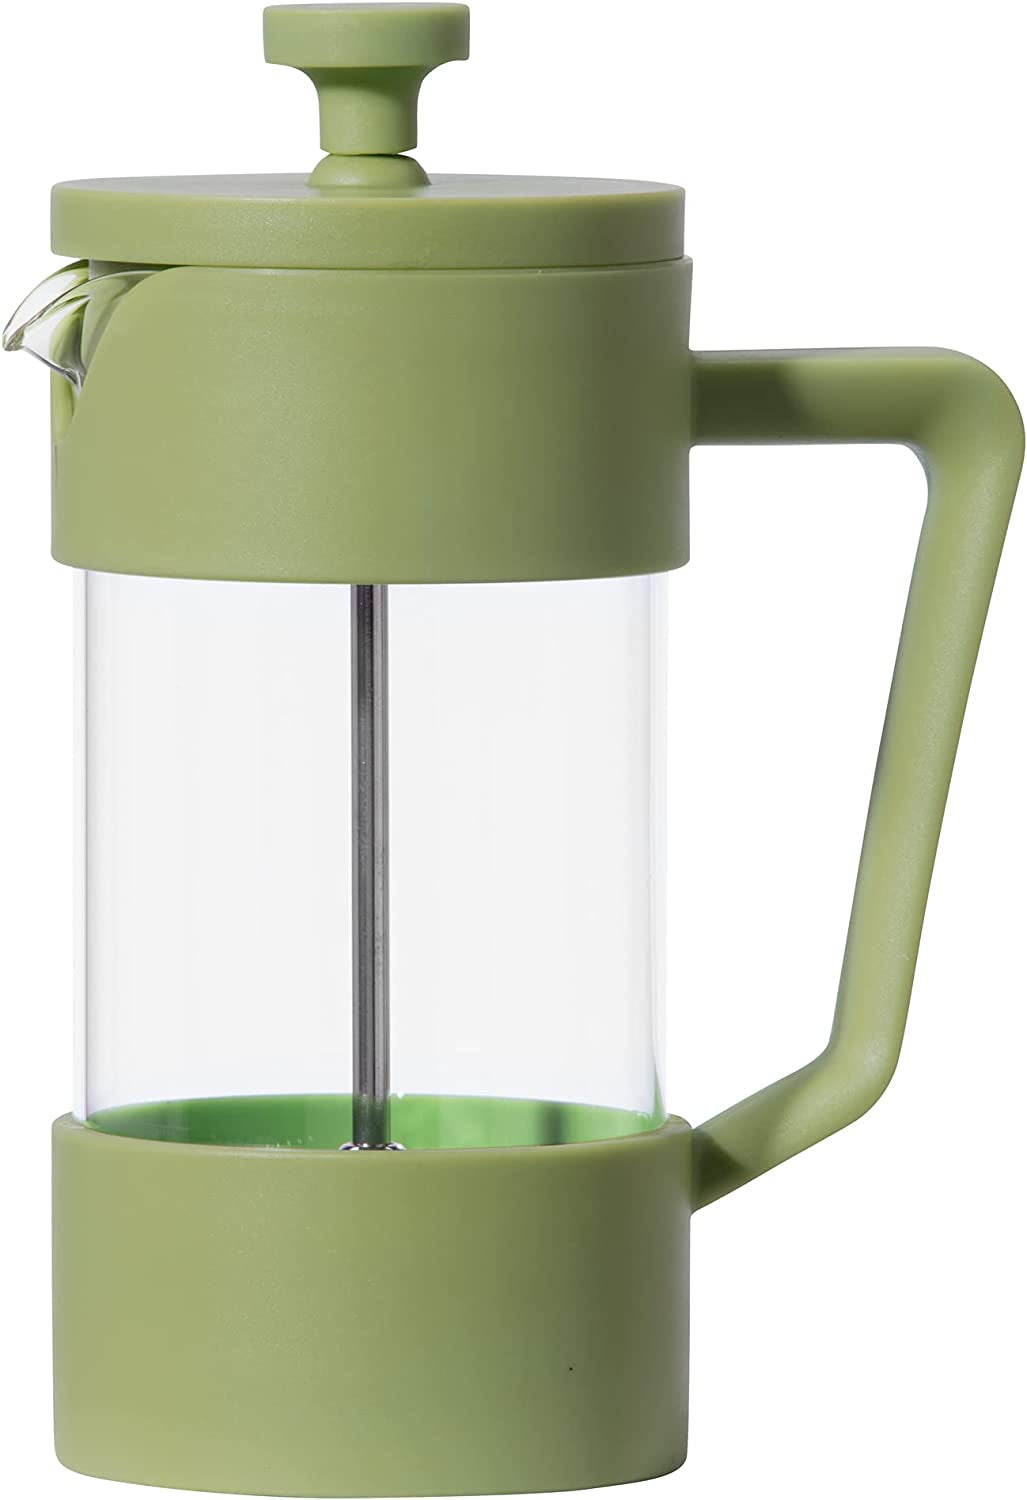 Borosilicate Glass French Press Coffee Maker - 12oz Capacity for Flavorful Coffee & Tea - About Brew